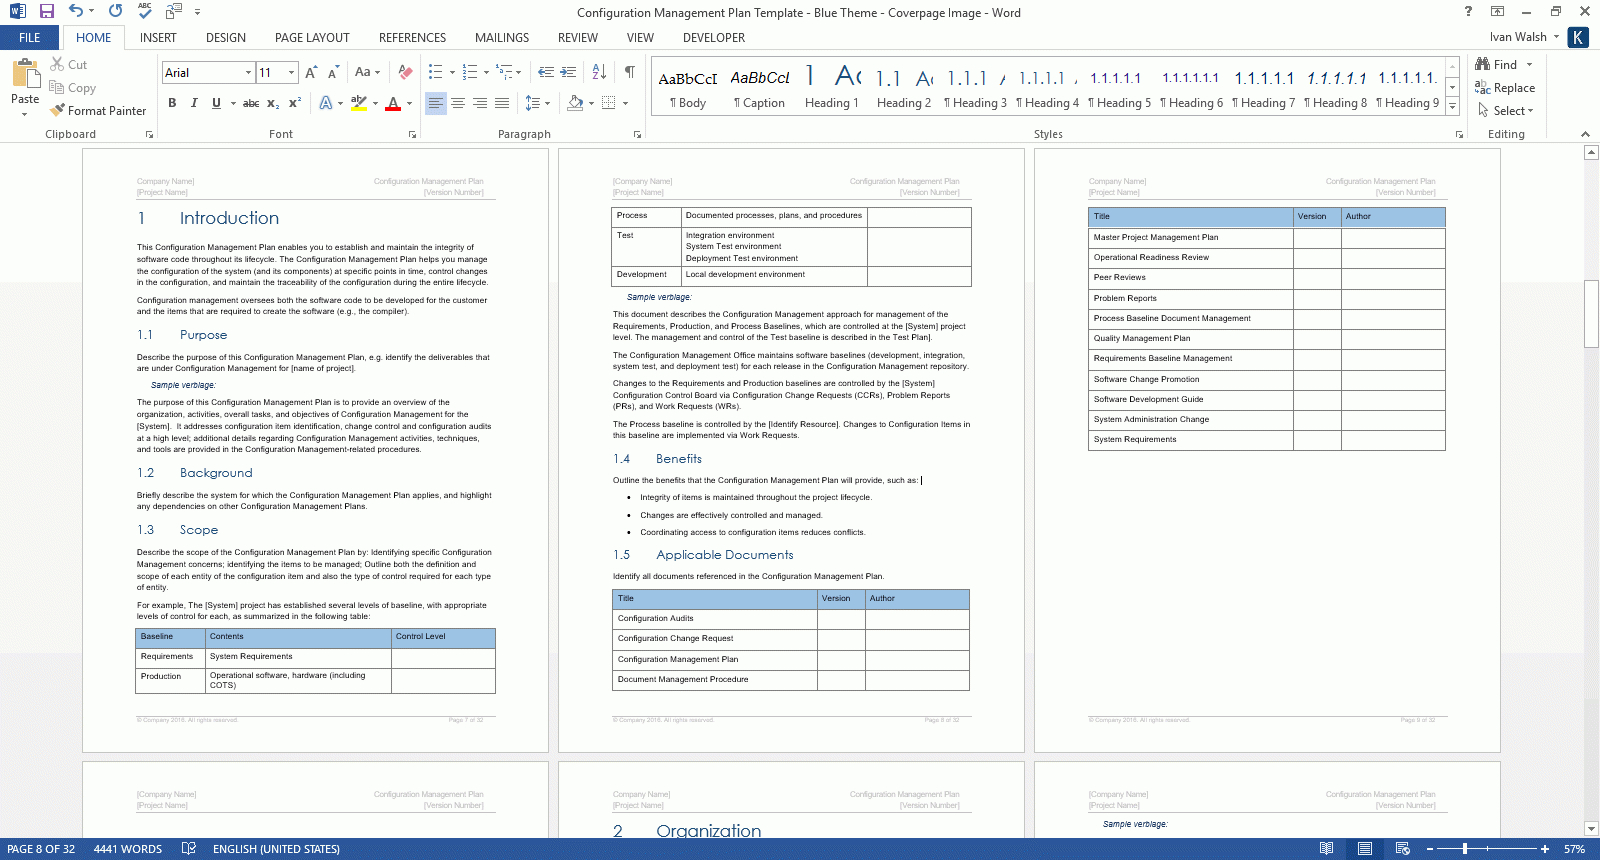 Configuration Management Plan Templates (Ms Office) In Training Manual Template Microsoft Word